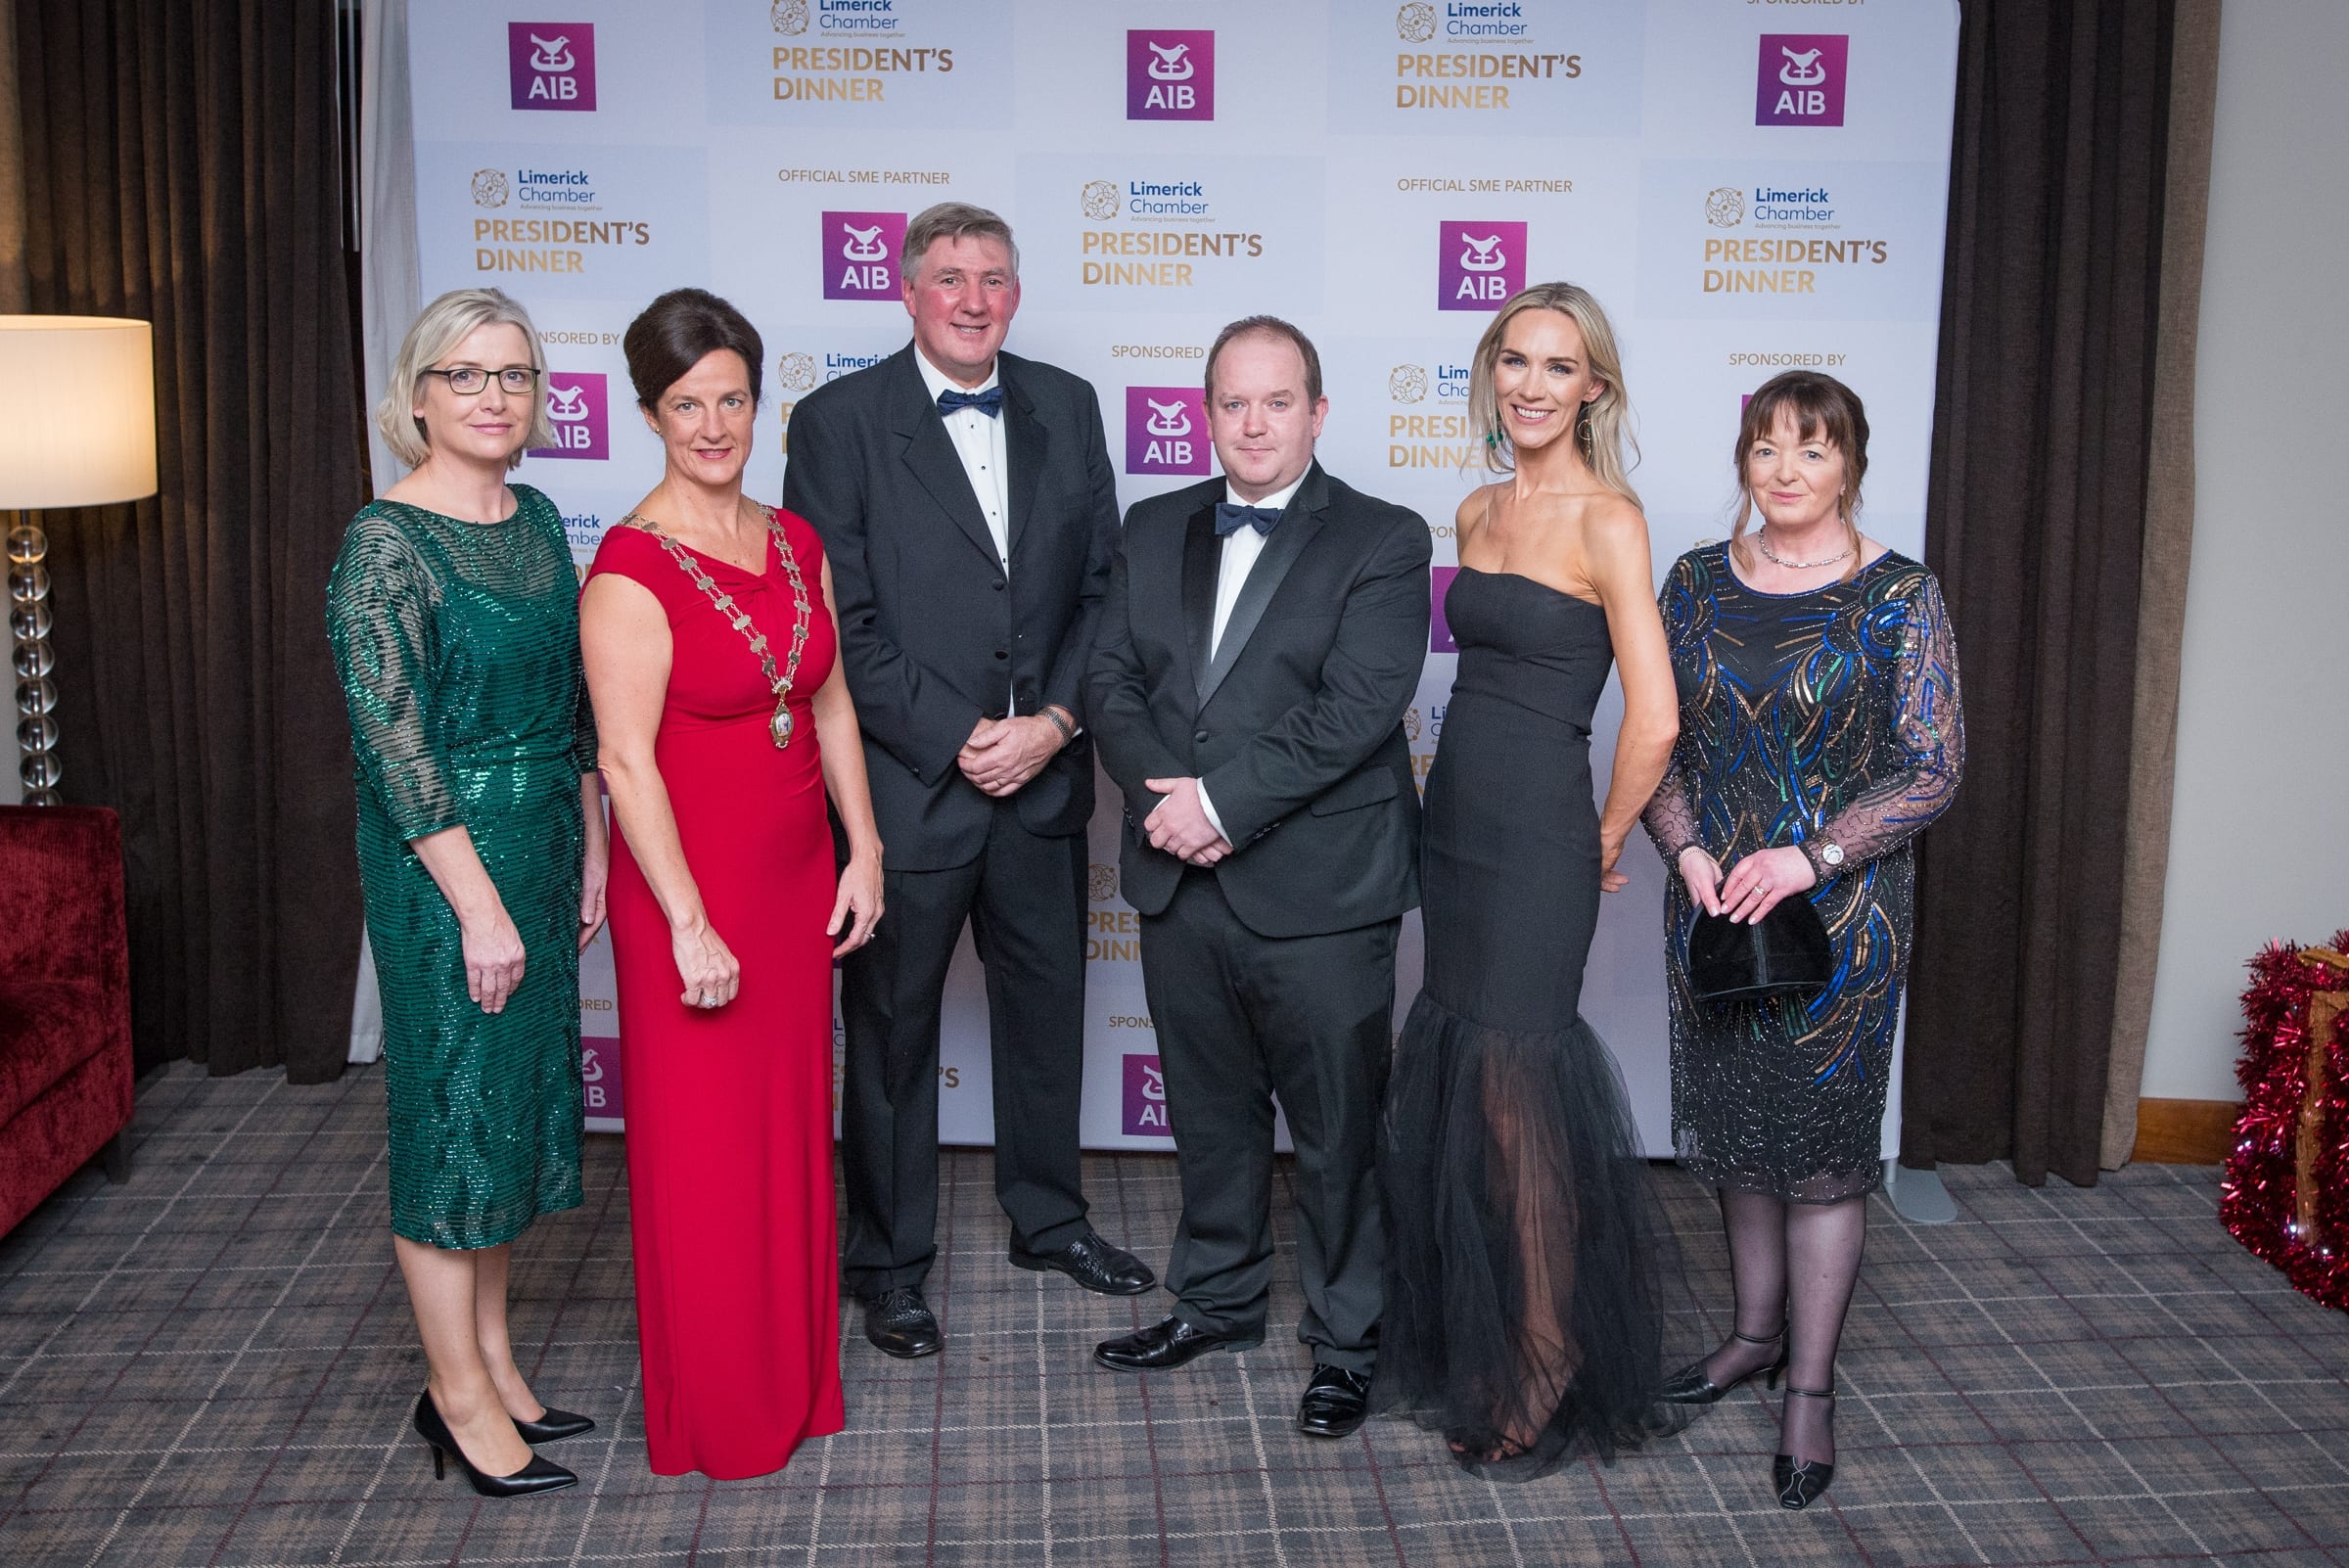 No repro fee- limerick chamber president's dinner- 16-11-2018, From Left to Right: Judy Tighe -  -AIB/Sponsors, Dr Mary Shire - President Limerick Chamber, Dermot Graham - AIB/ Sponsor, Conor O'Sullivan - AIB/ Sponsor, Deirdre Ryan - CEO Limerick Chamber, Joan O'Dell- AIB/ Sponsor
Photo credit Shauna Kennedy